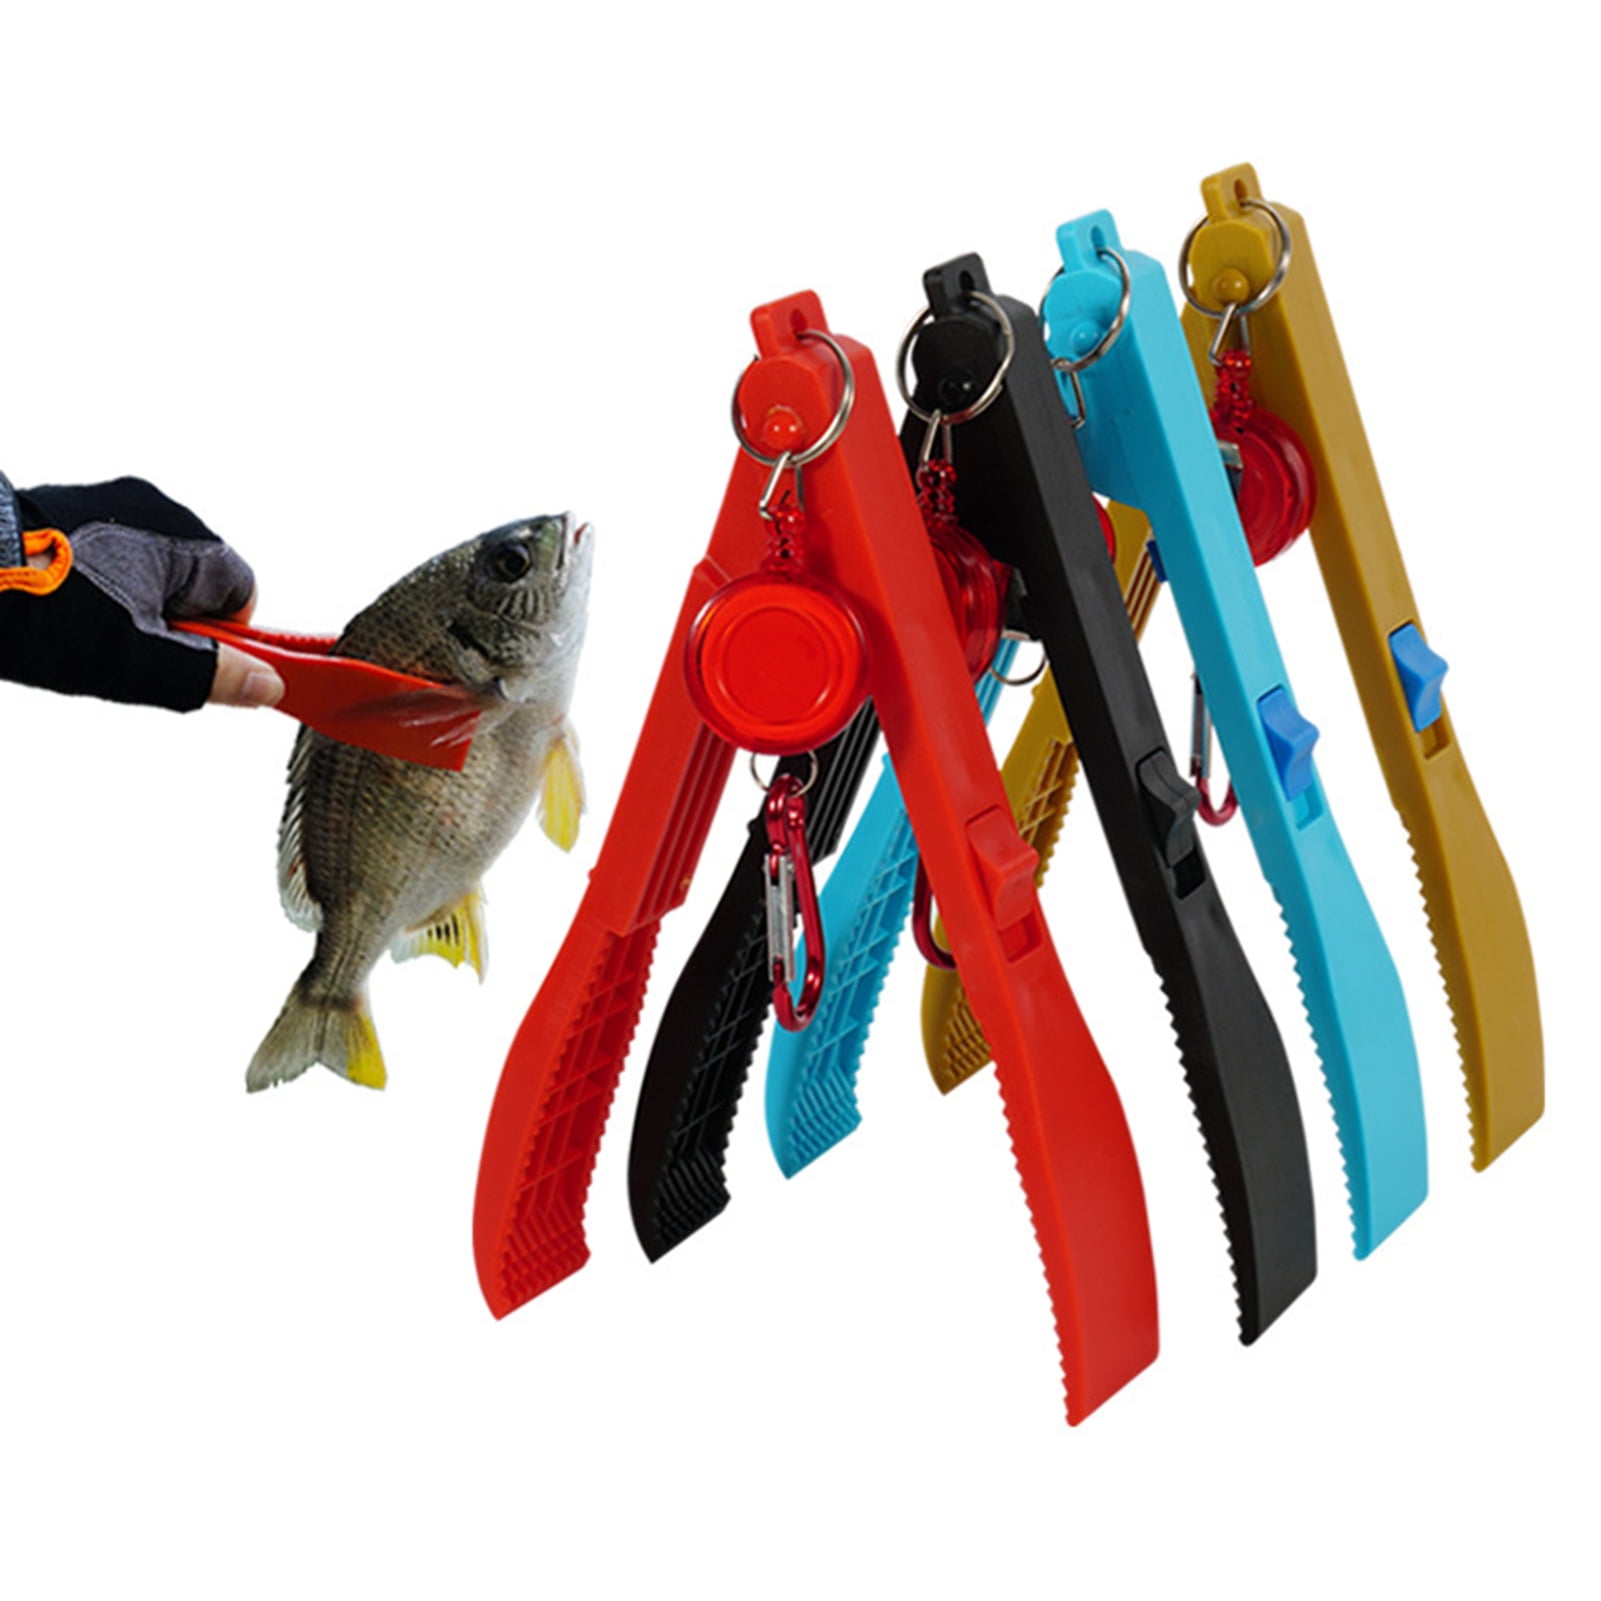 Details about   Fishing Tool Fishing Tackle Accessories Bucket Supplies Fish Clip Holder YD 